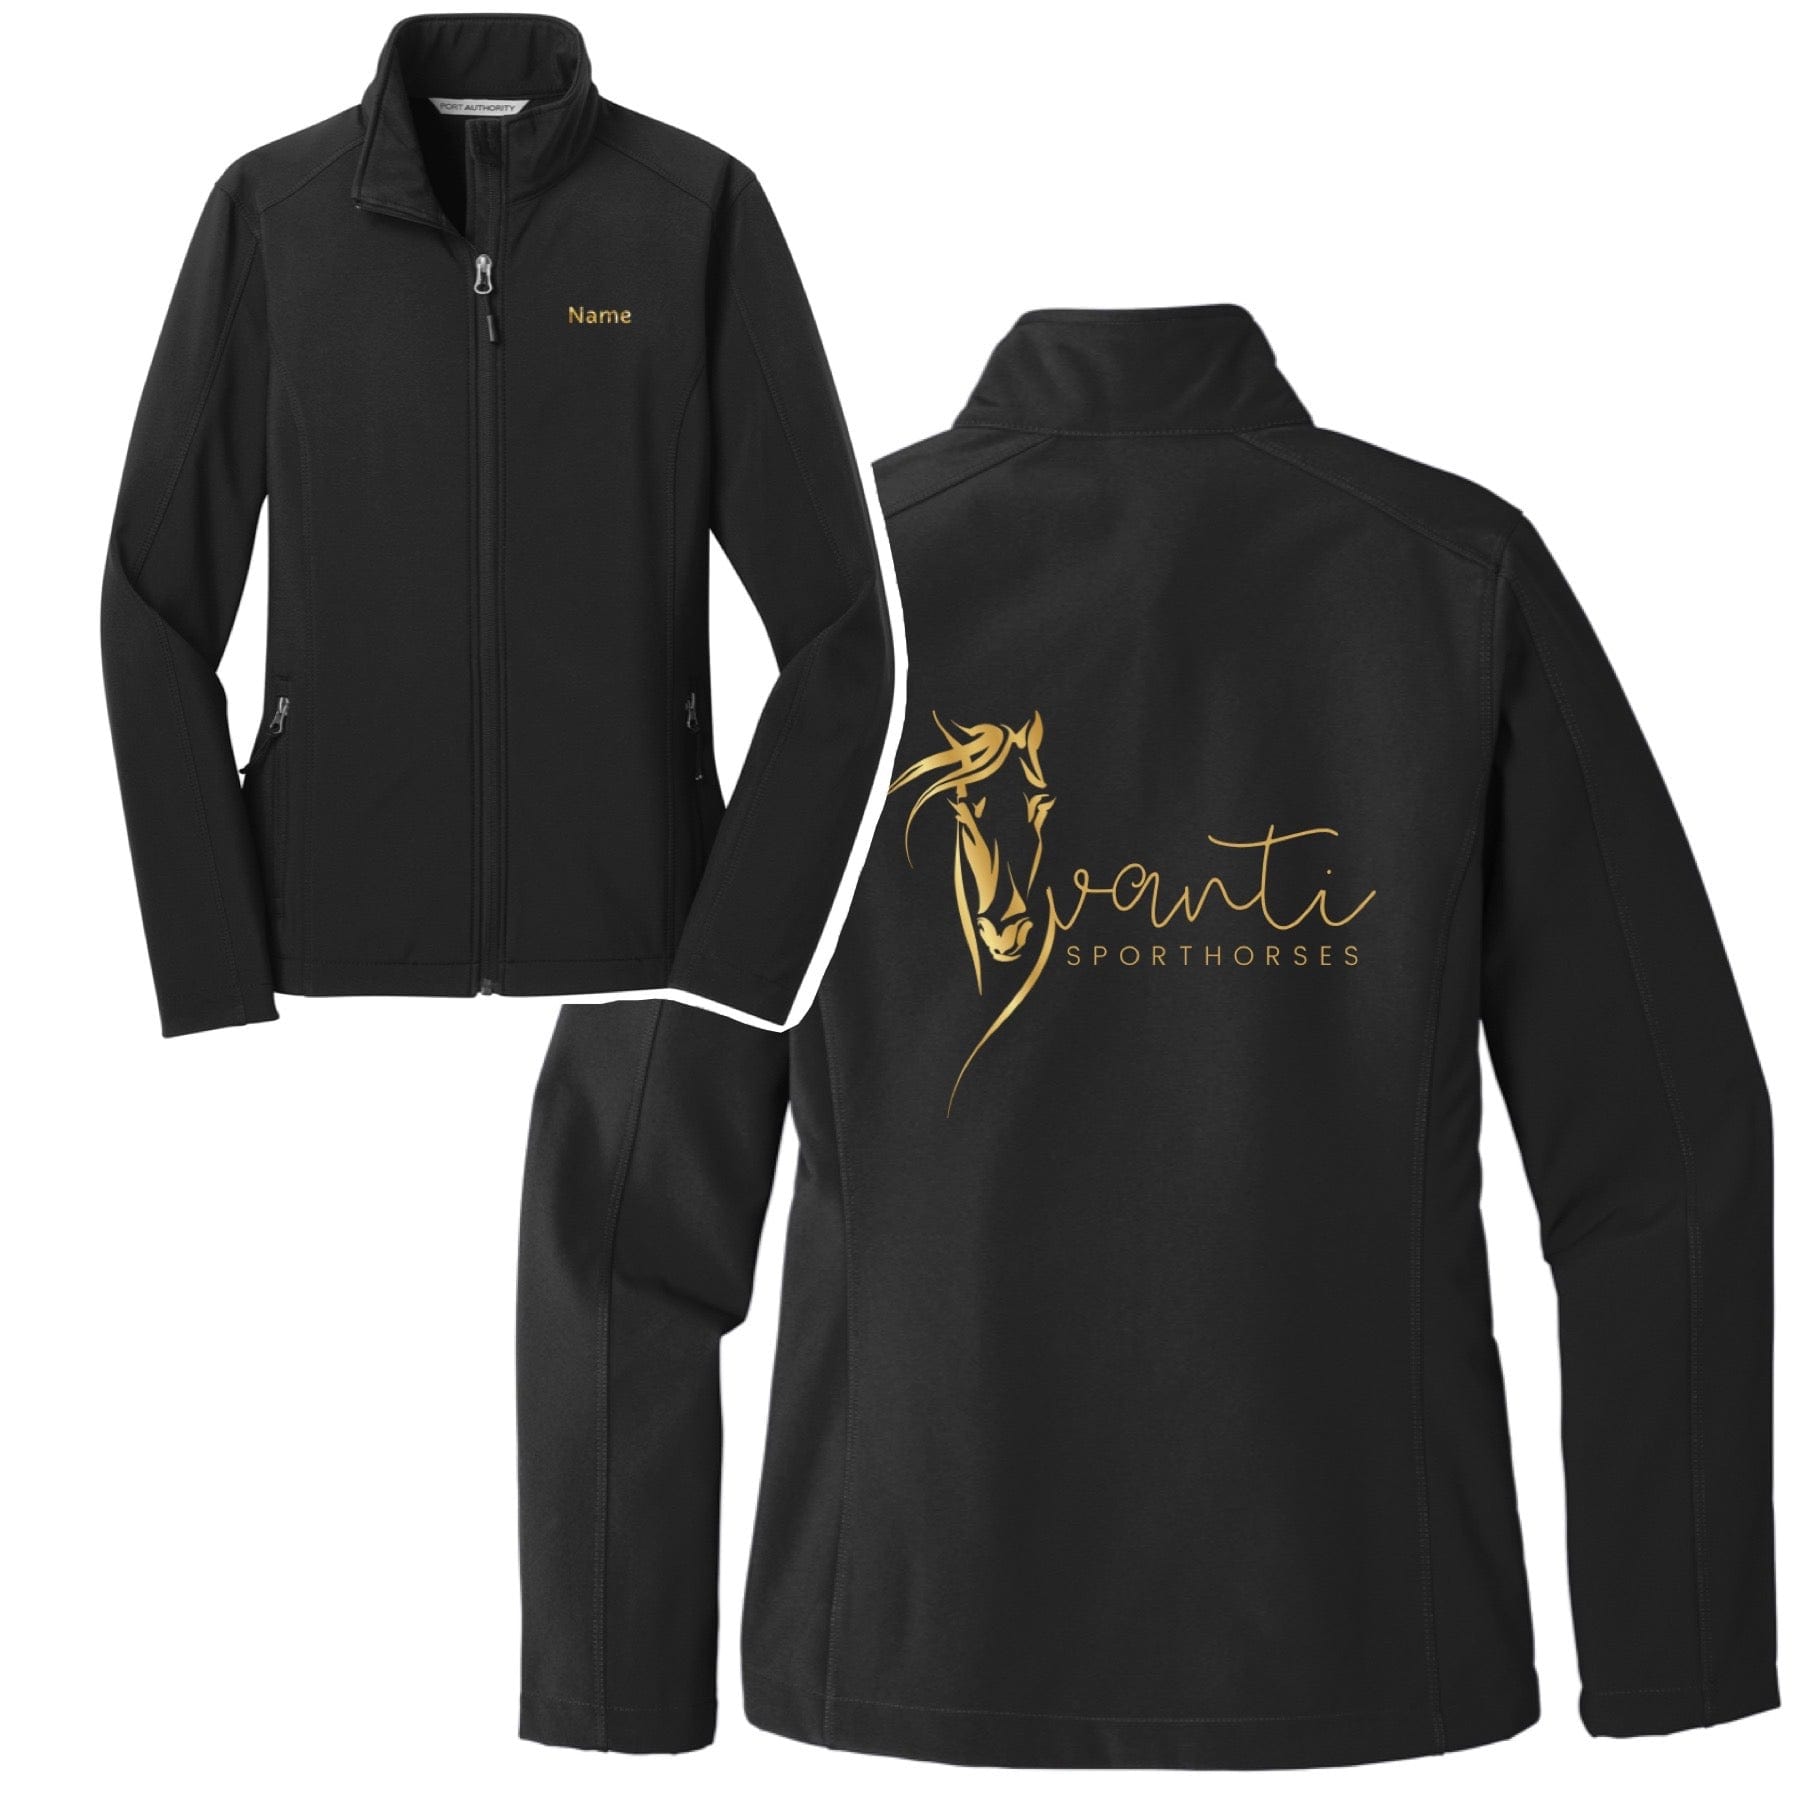 Equestrian Team Apparel Avanti Sport Horses Shell Jacket equestrian team apparel online tack store mobile tack store custom farm apparel custom show stable clothing equestrian lifestyle horse show clothing riding clothes horses equestrian tack store